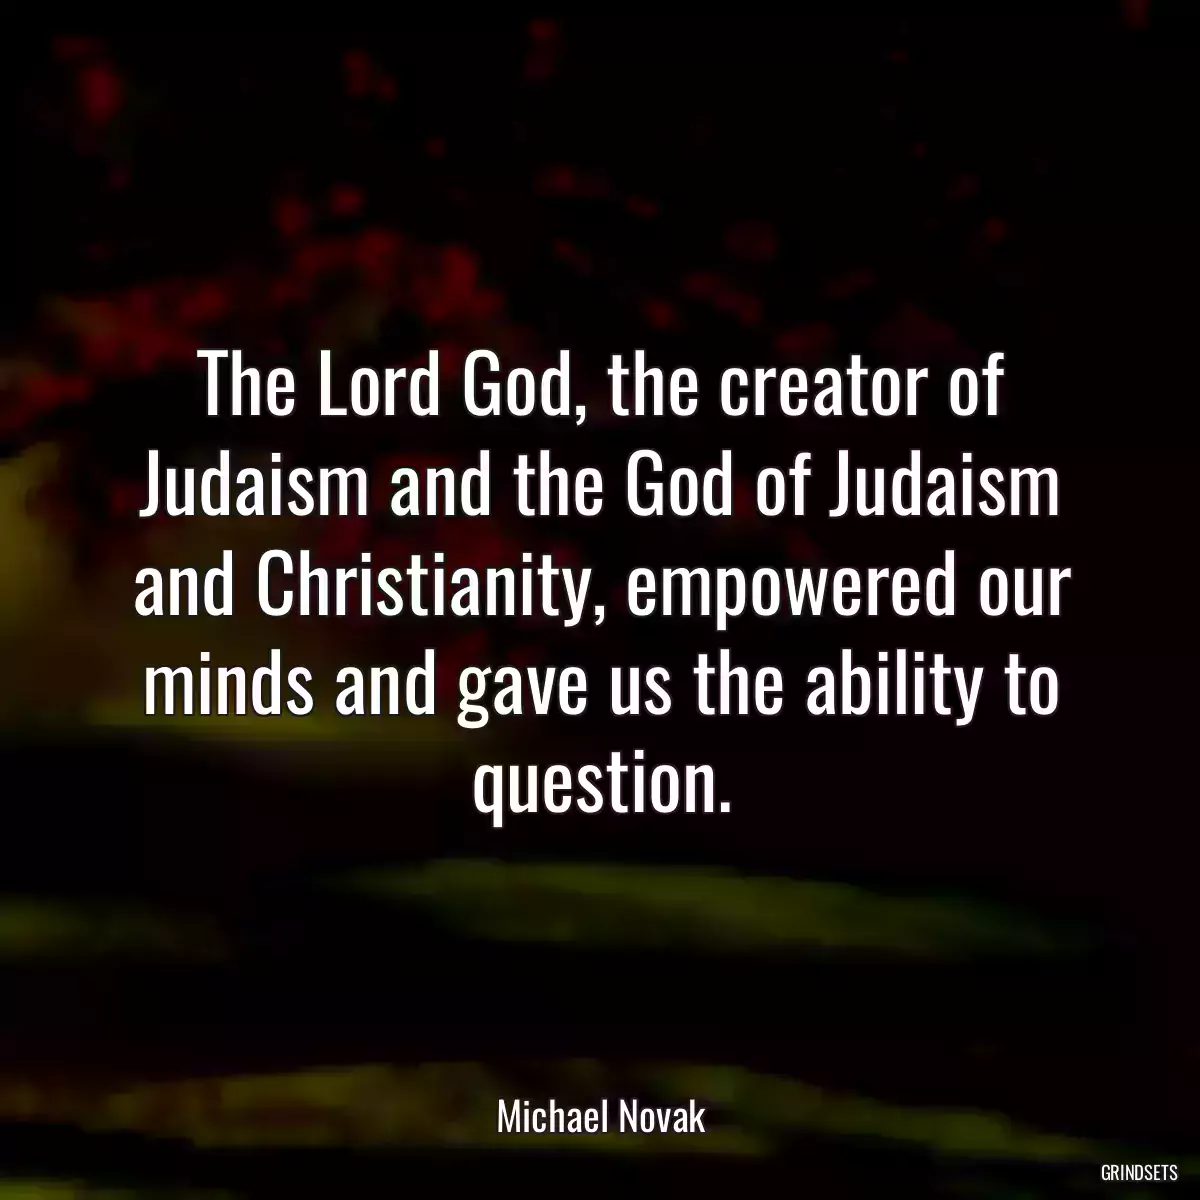 The Lord God, the creator of Judaism and the God of Judaism and Christianity, empowered our minds and gave us the ability to question.